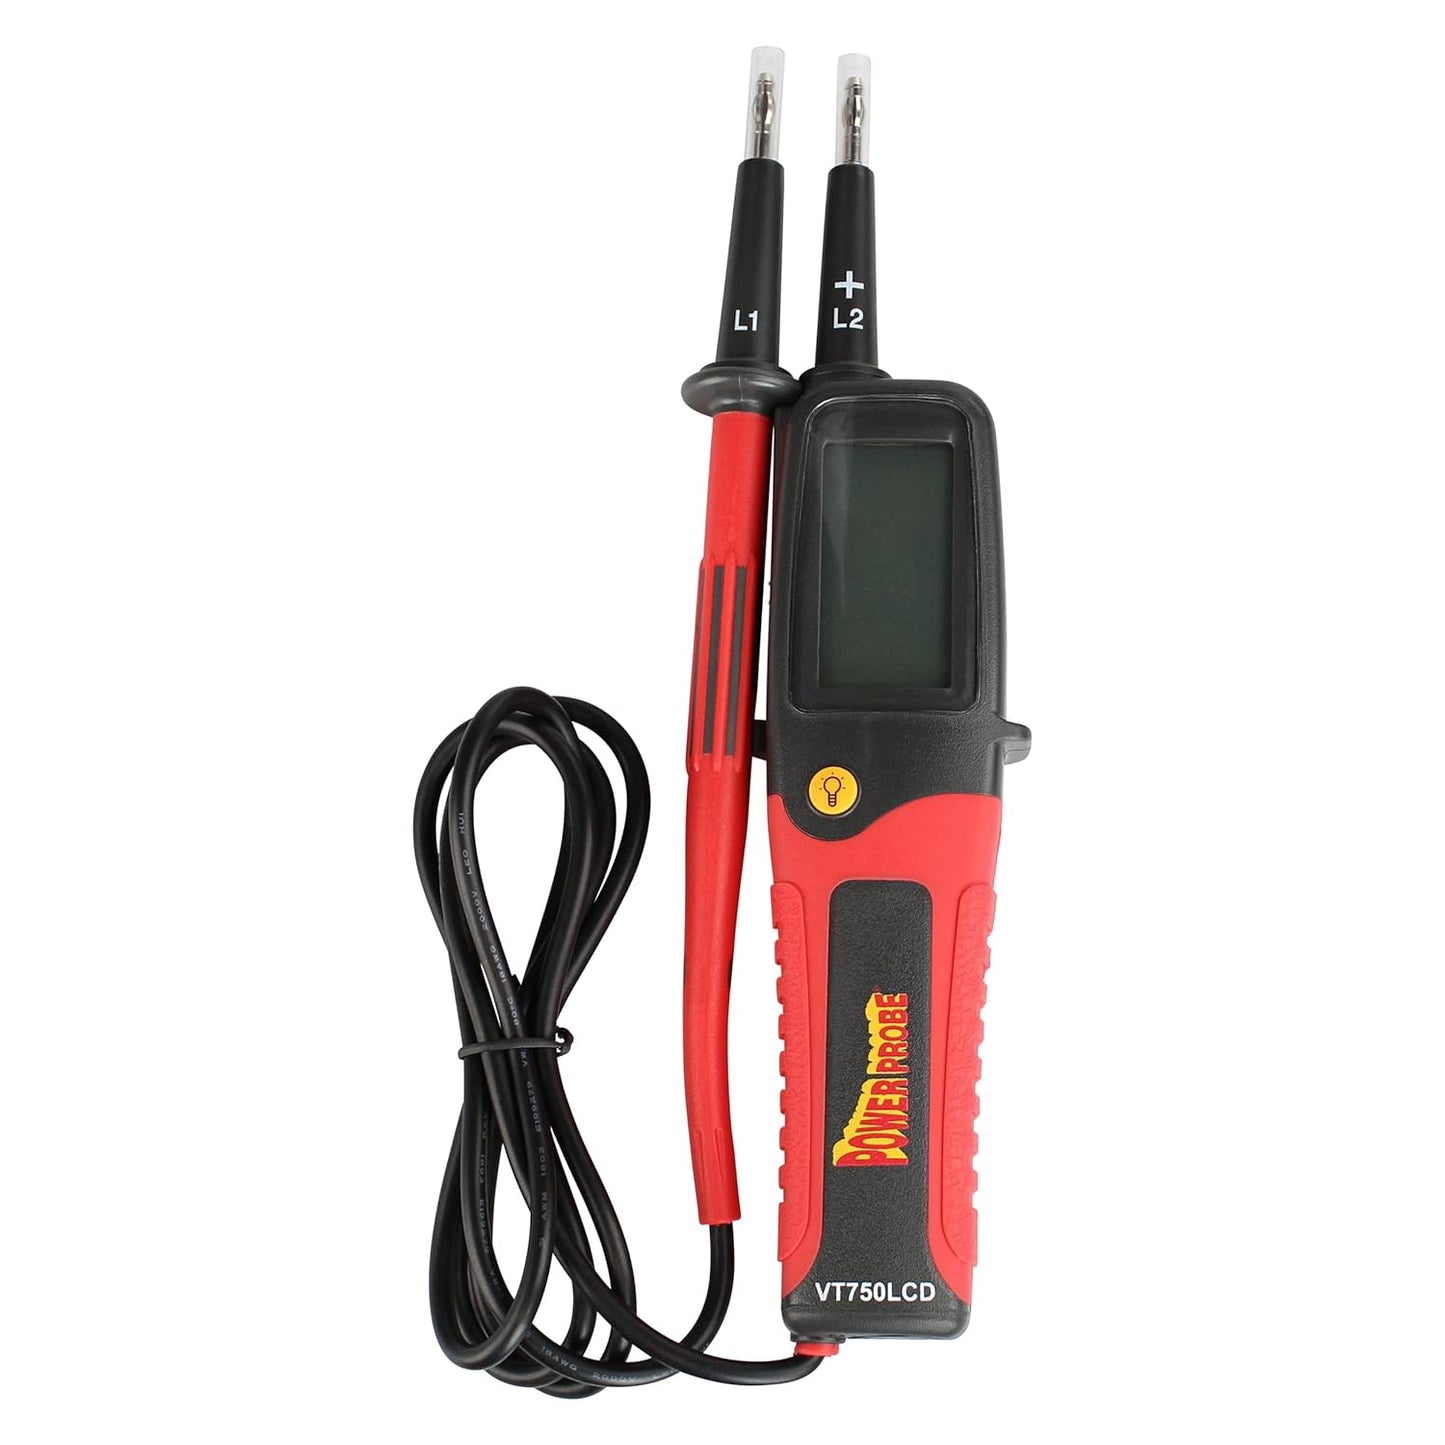 Power Probe PPVT750LCD Two-Pole Voltage Tester 12-750V AC/DC, Continuity, RCD and Resistance